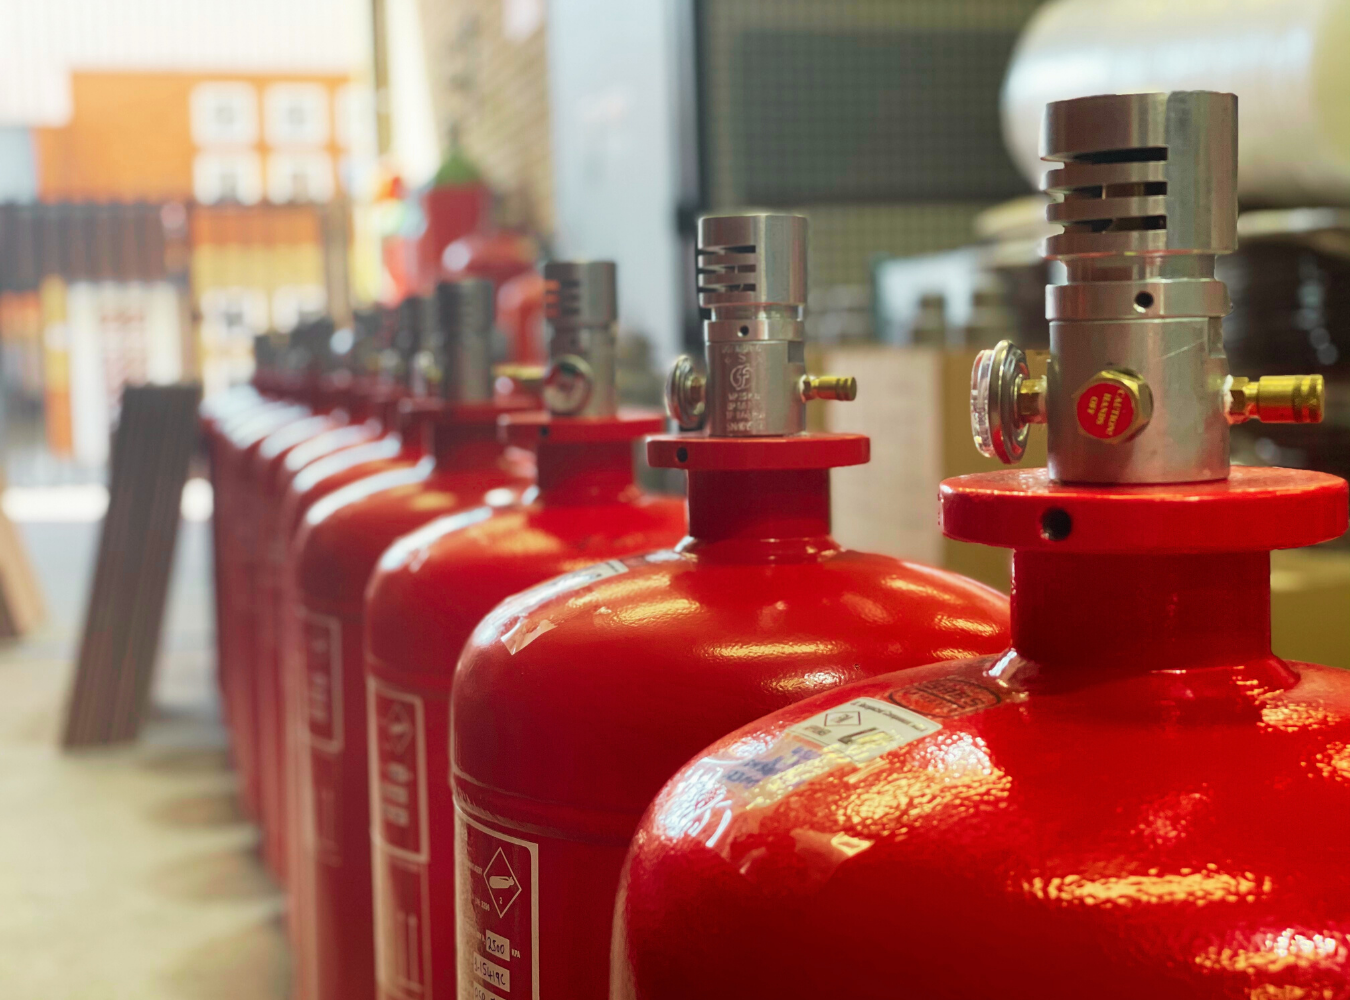 HFC227ea Fire Suppression System Gas Cylinders